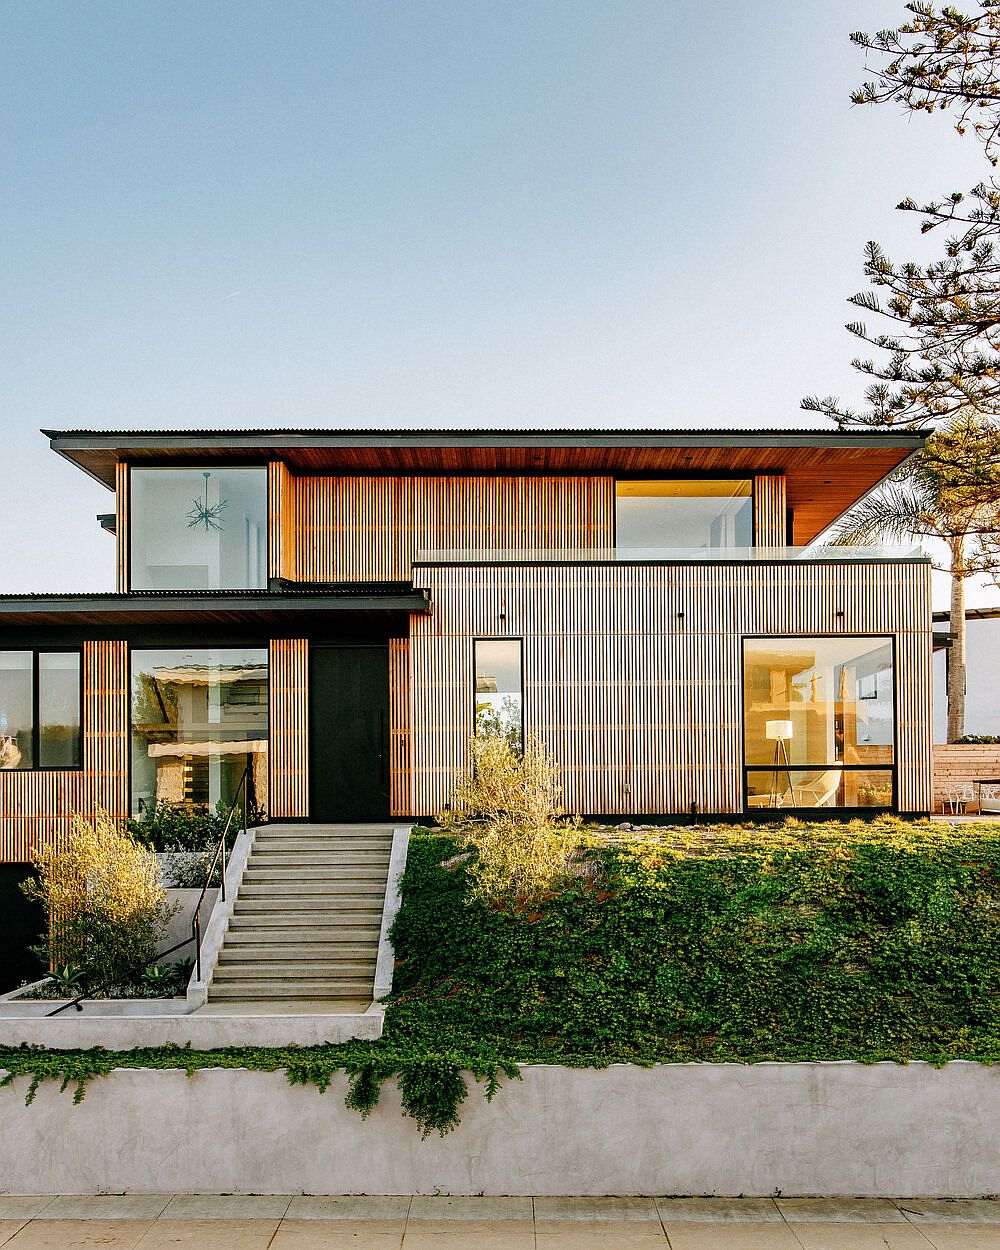 Wood-siding-with-vertical-cedar-boards-shapes-the-exterior-of-the-lovely-Californian-residence-18495